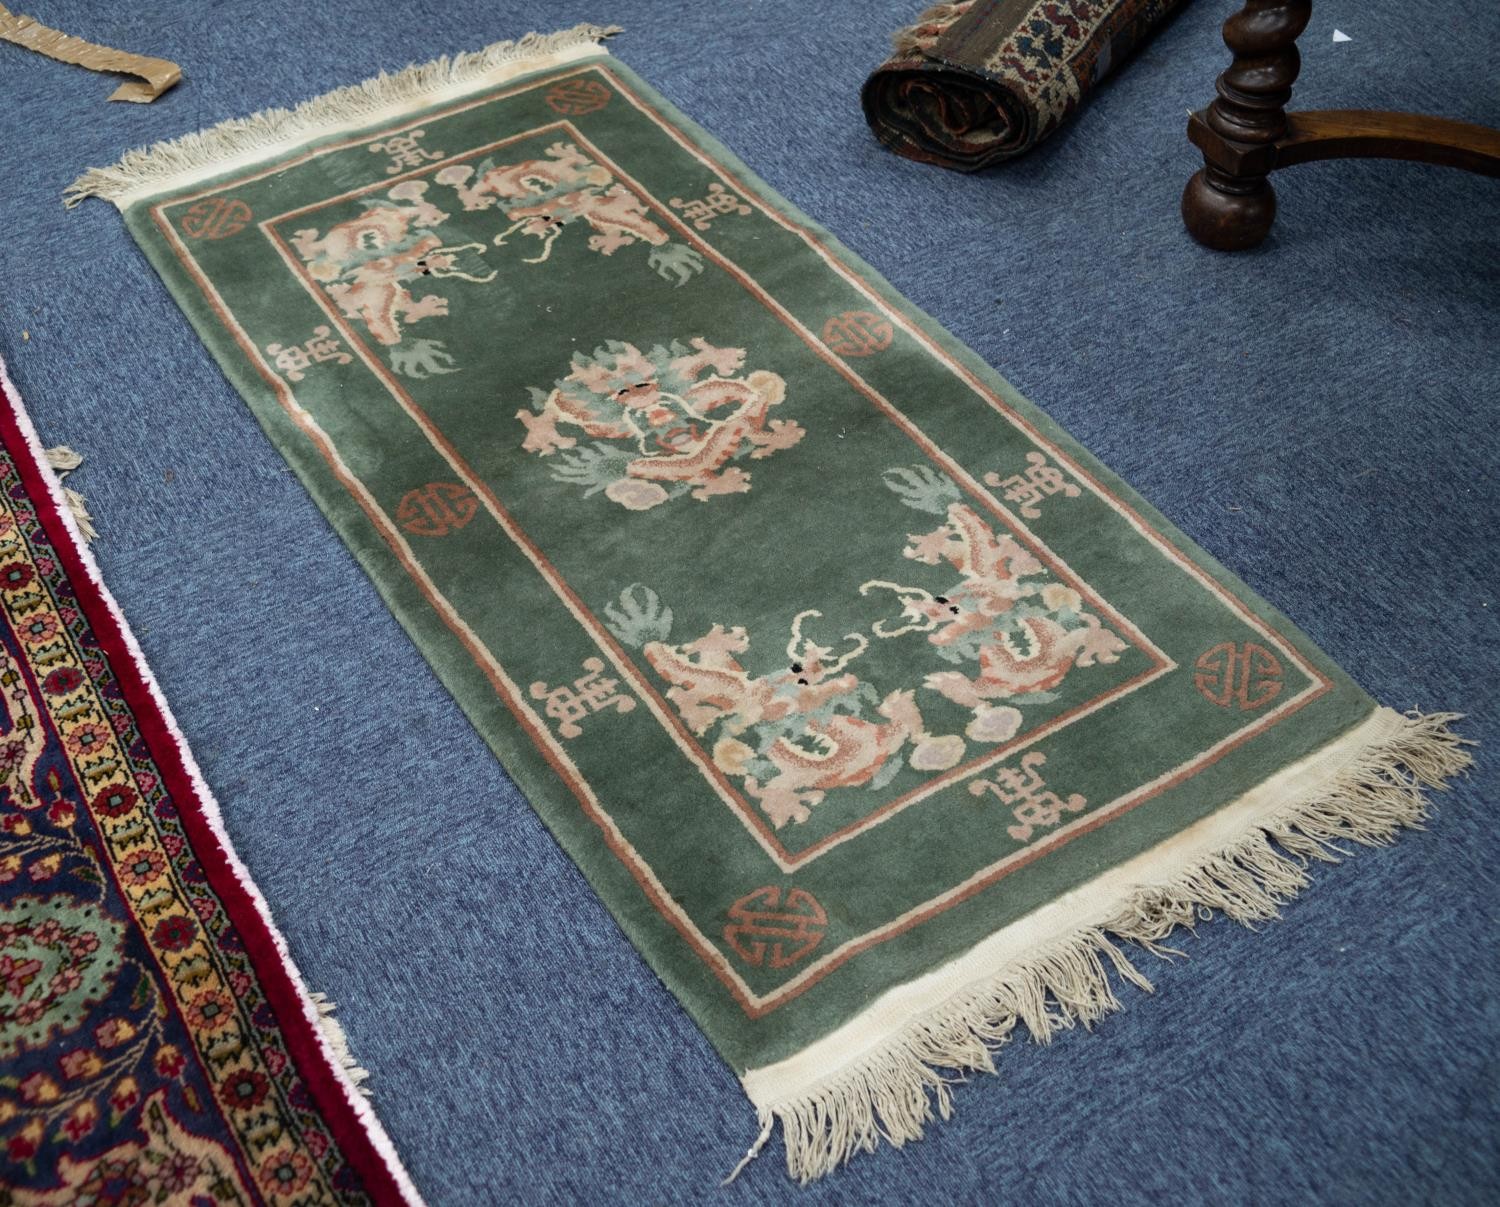 A WASHED CHINESE OBLONG RUG, with dragon medallion and spandrels on a moss green field, 4'6" x 2'4"